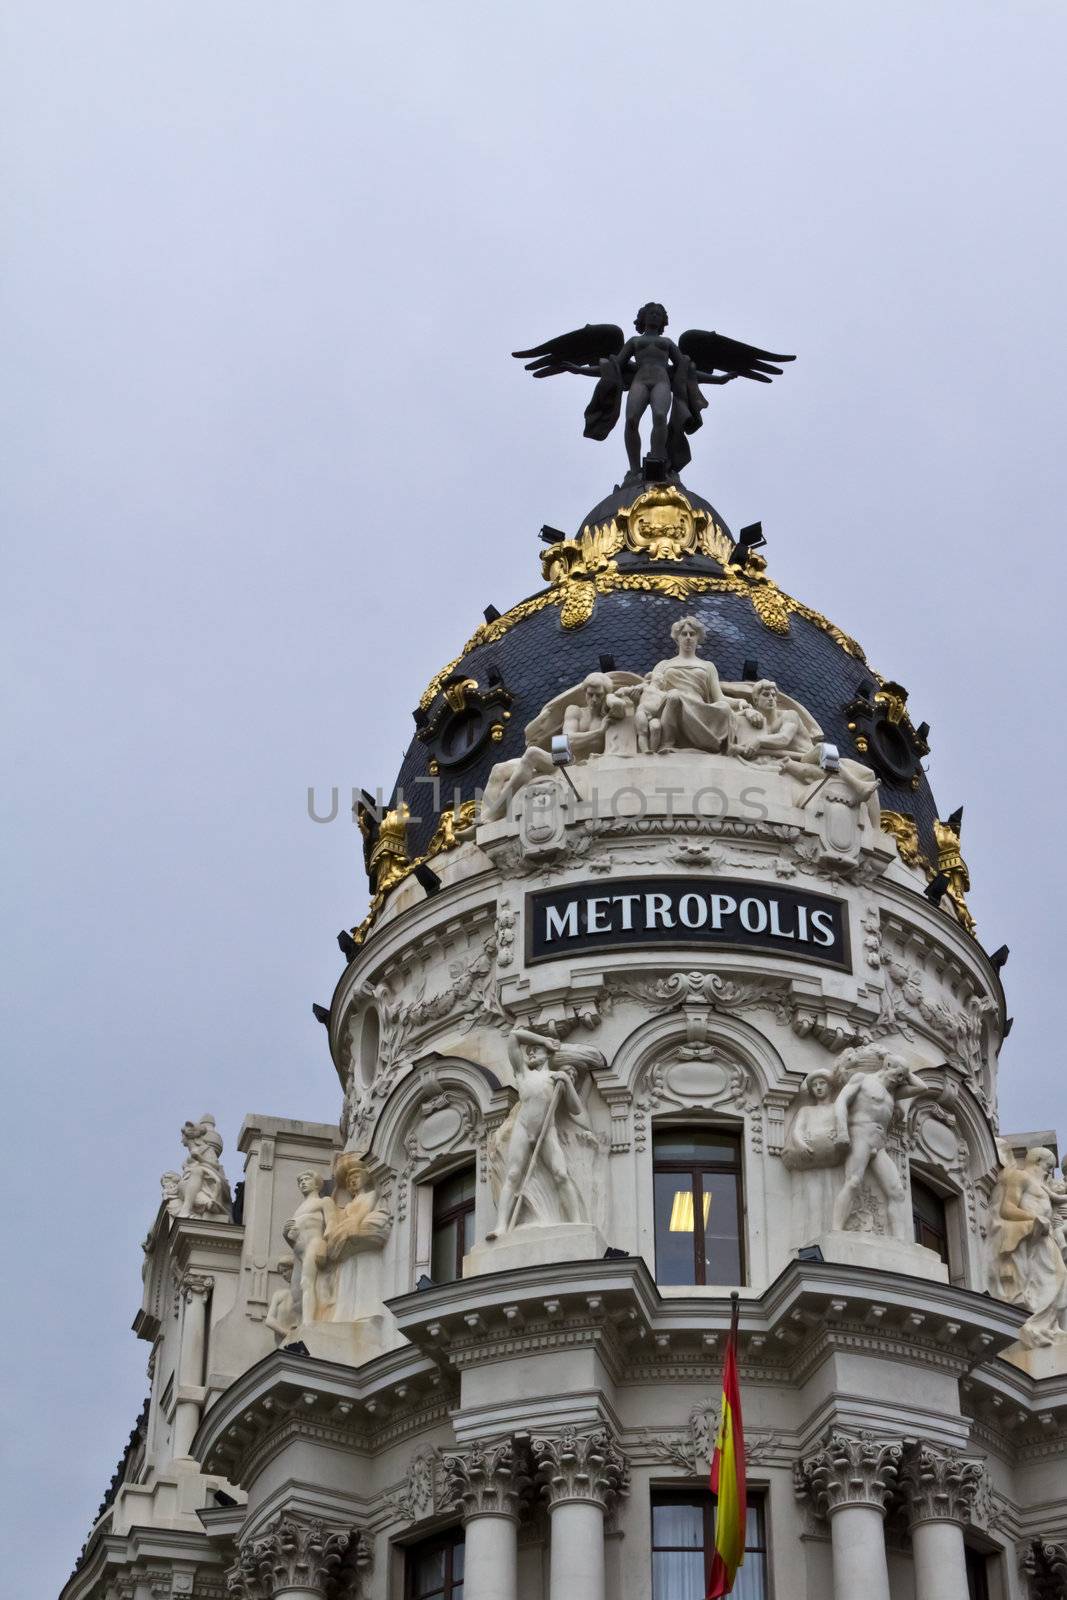 The well known Metropolis building in the center of Madrid